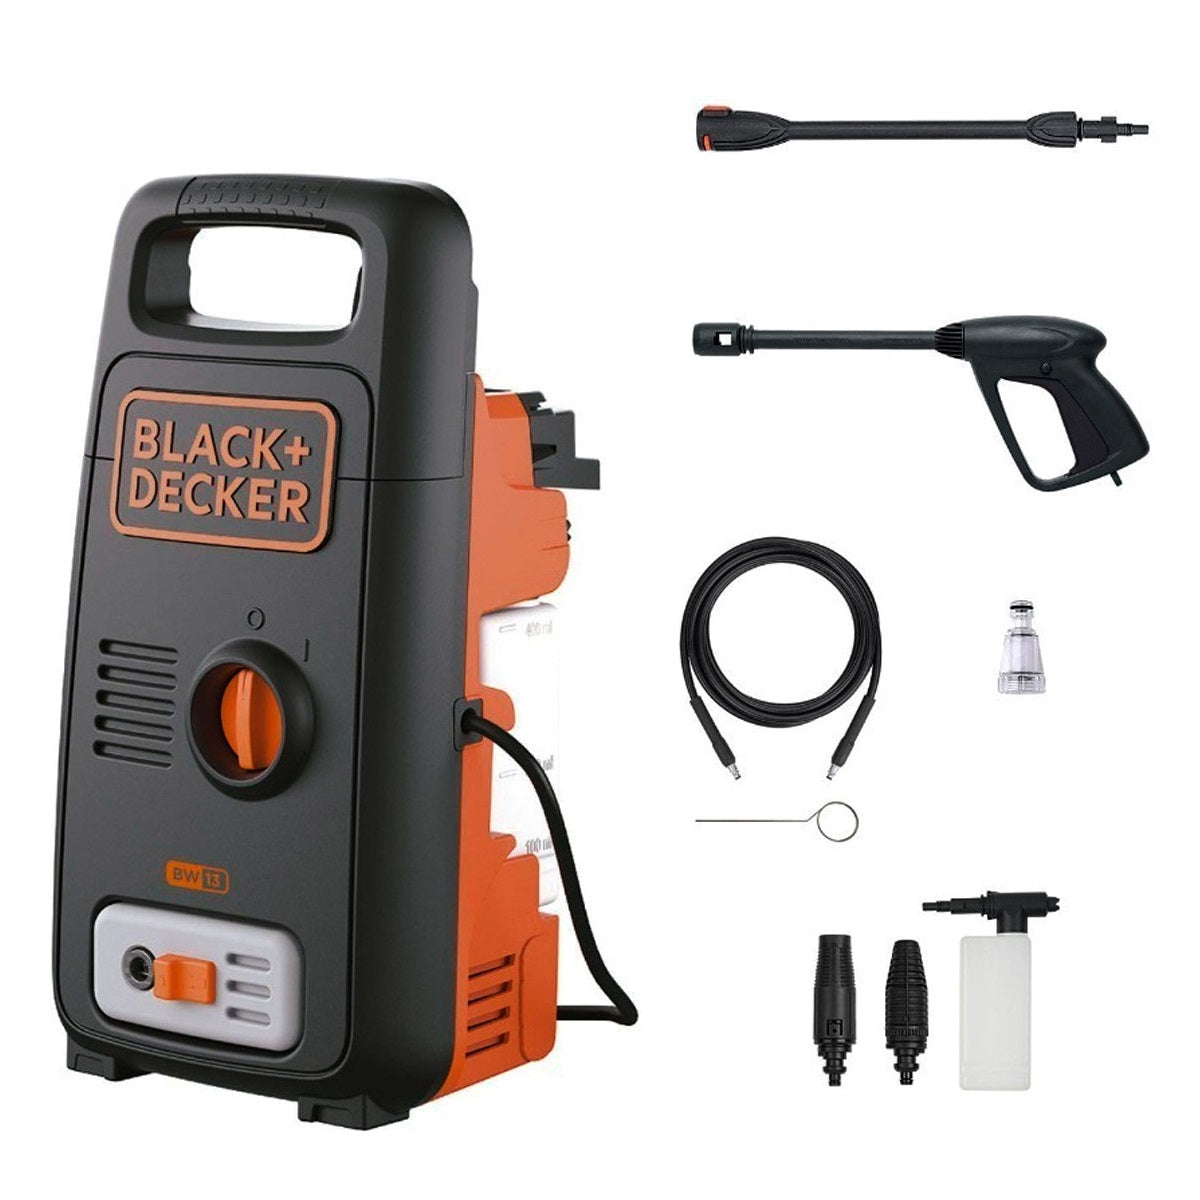 Black + Decker BW13 – Hygiene and Cleaning Equipment